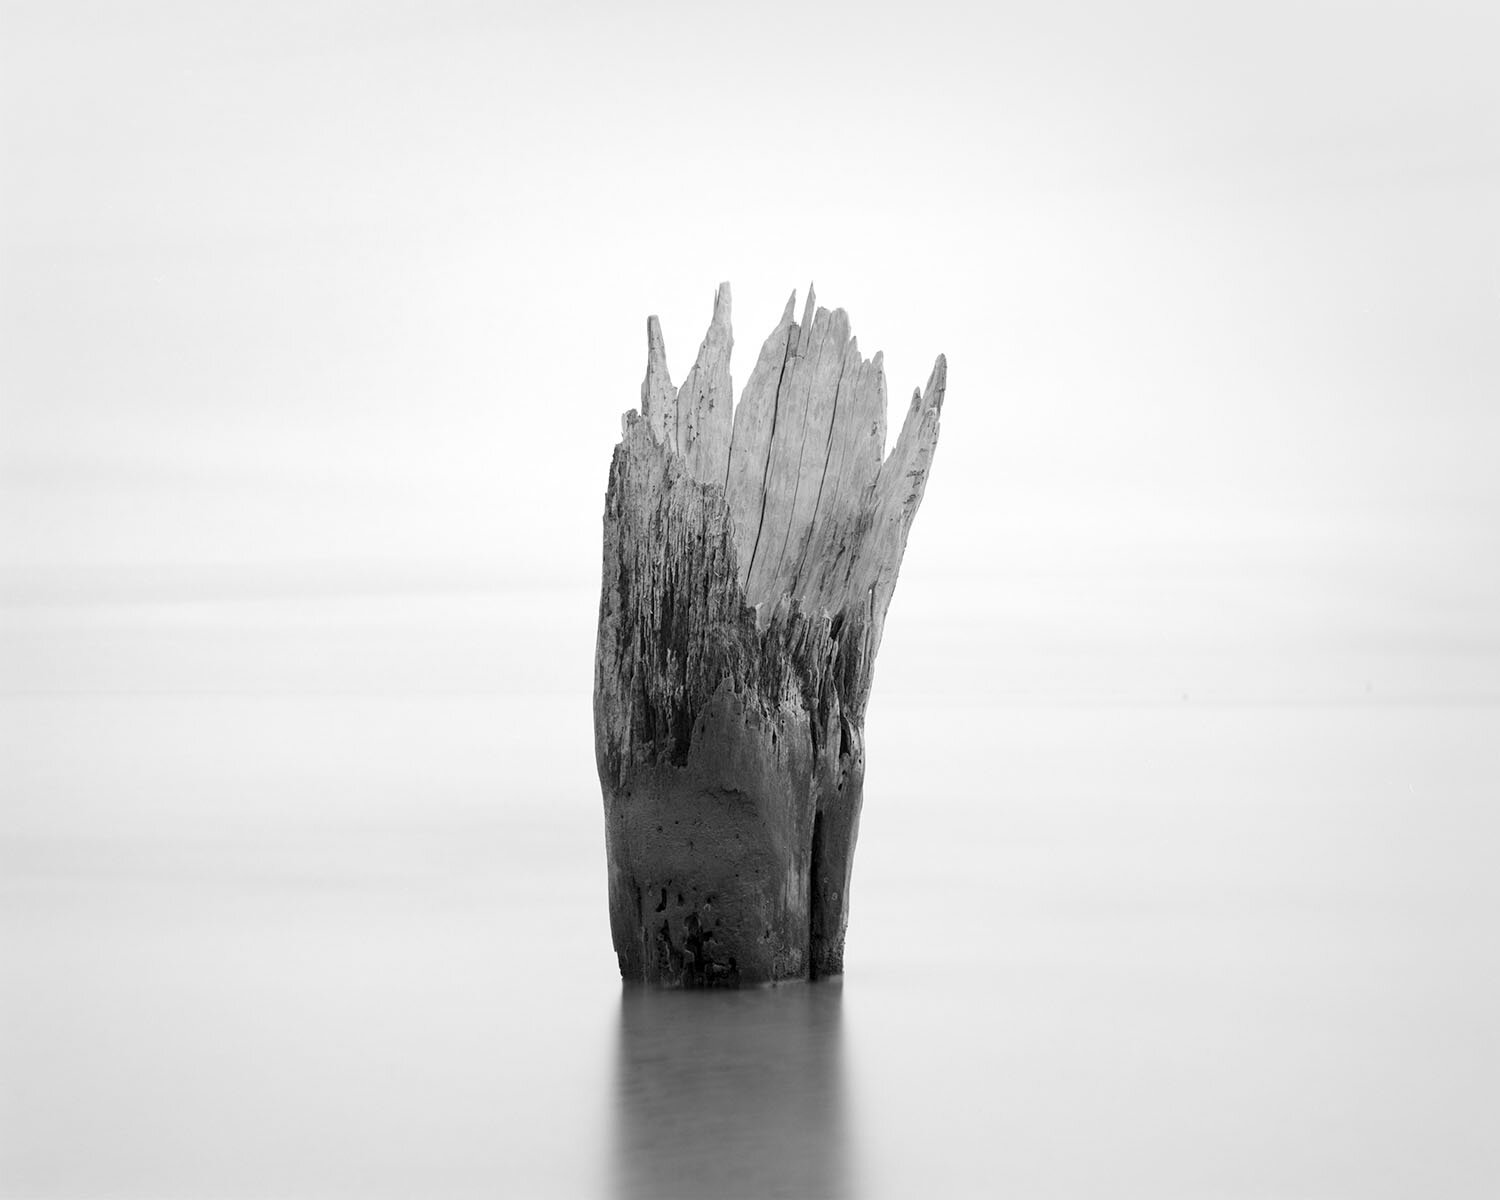 GHOST FOREST IX